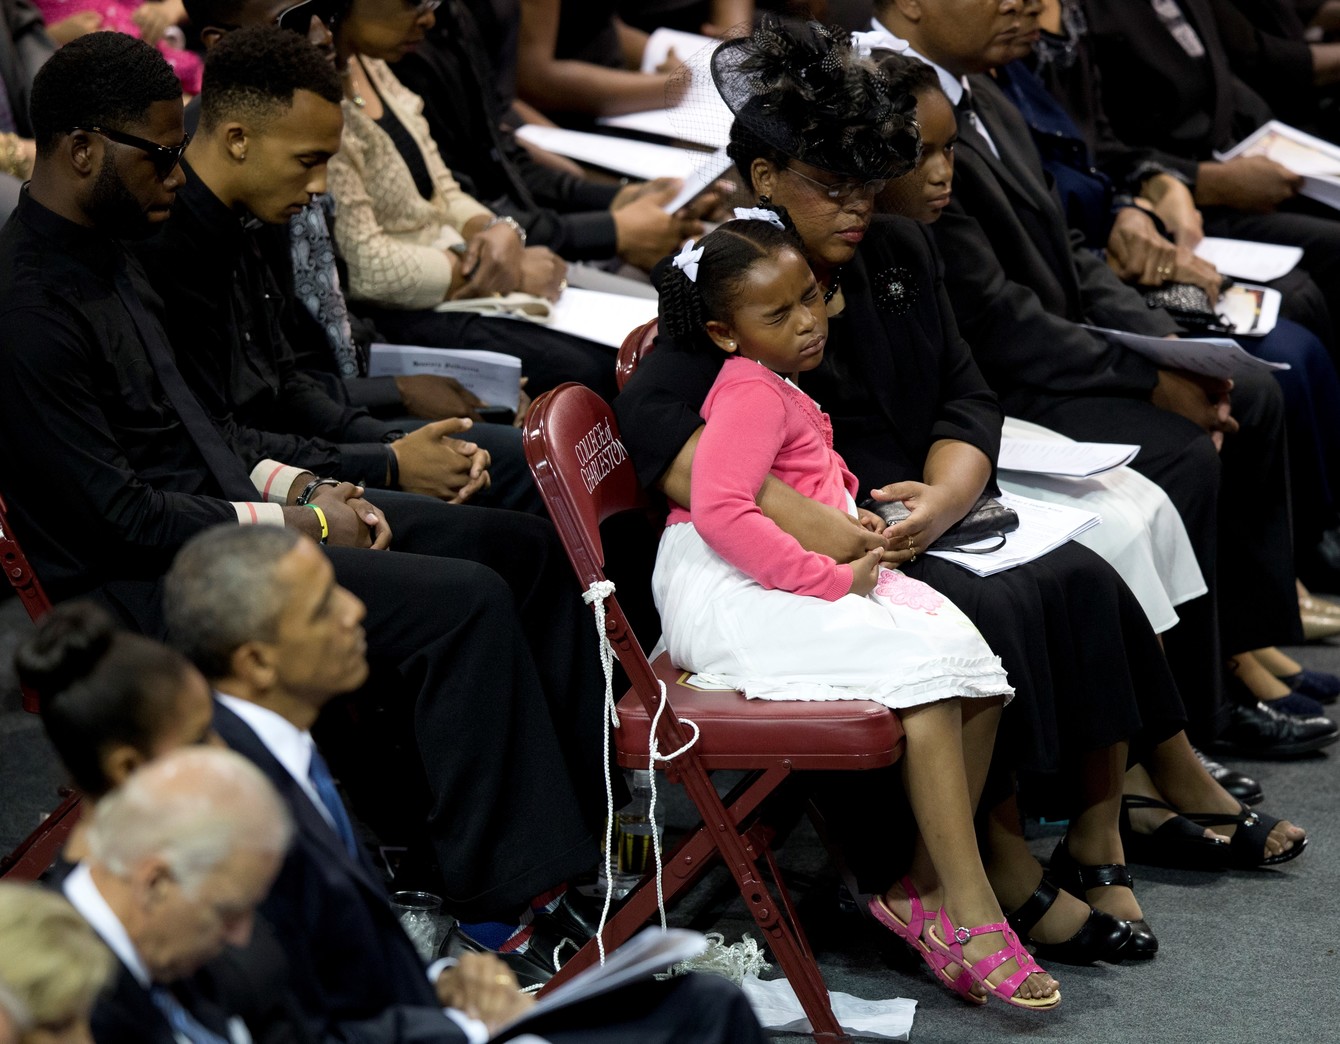 The widow of Clementa Pinckney, a pastor and South Carolina lawmaker slain in the mass murder at Charleston’s Mother Emanuel African Methodist Episcopal Church, hugs her daughter during a 2015 memorial service for victims of that attack. (AP/Carolyn Kaster)